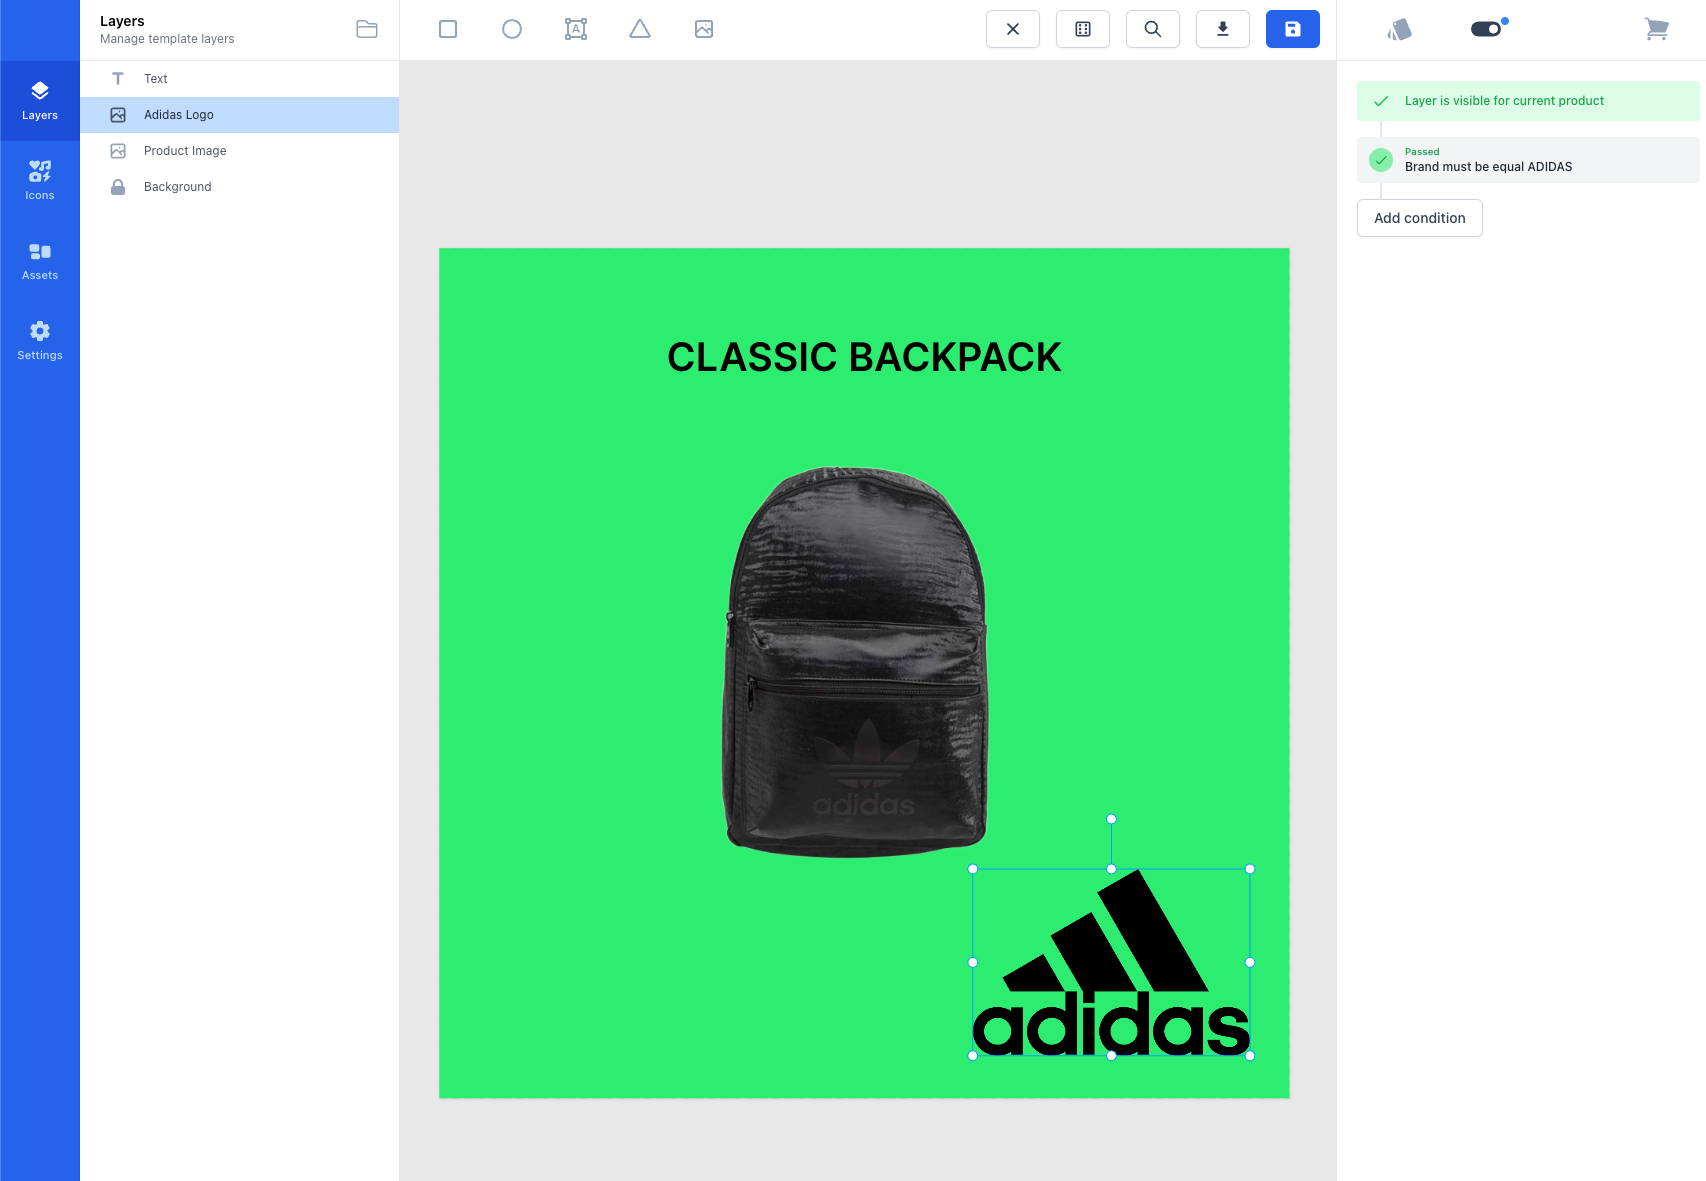 The logo is only visible if the brand is ADIDAS